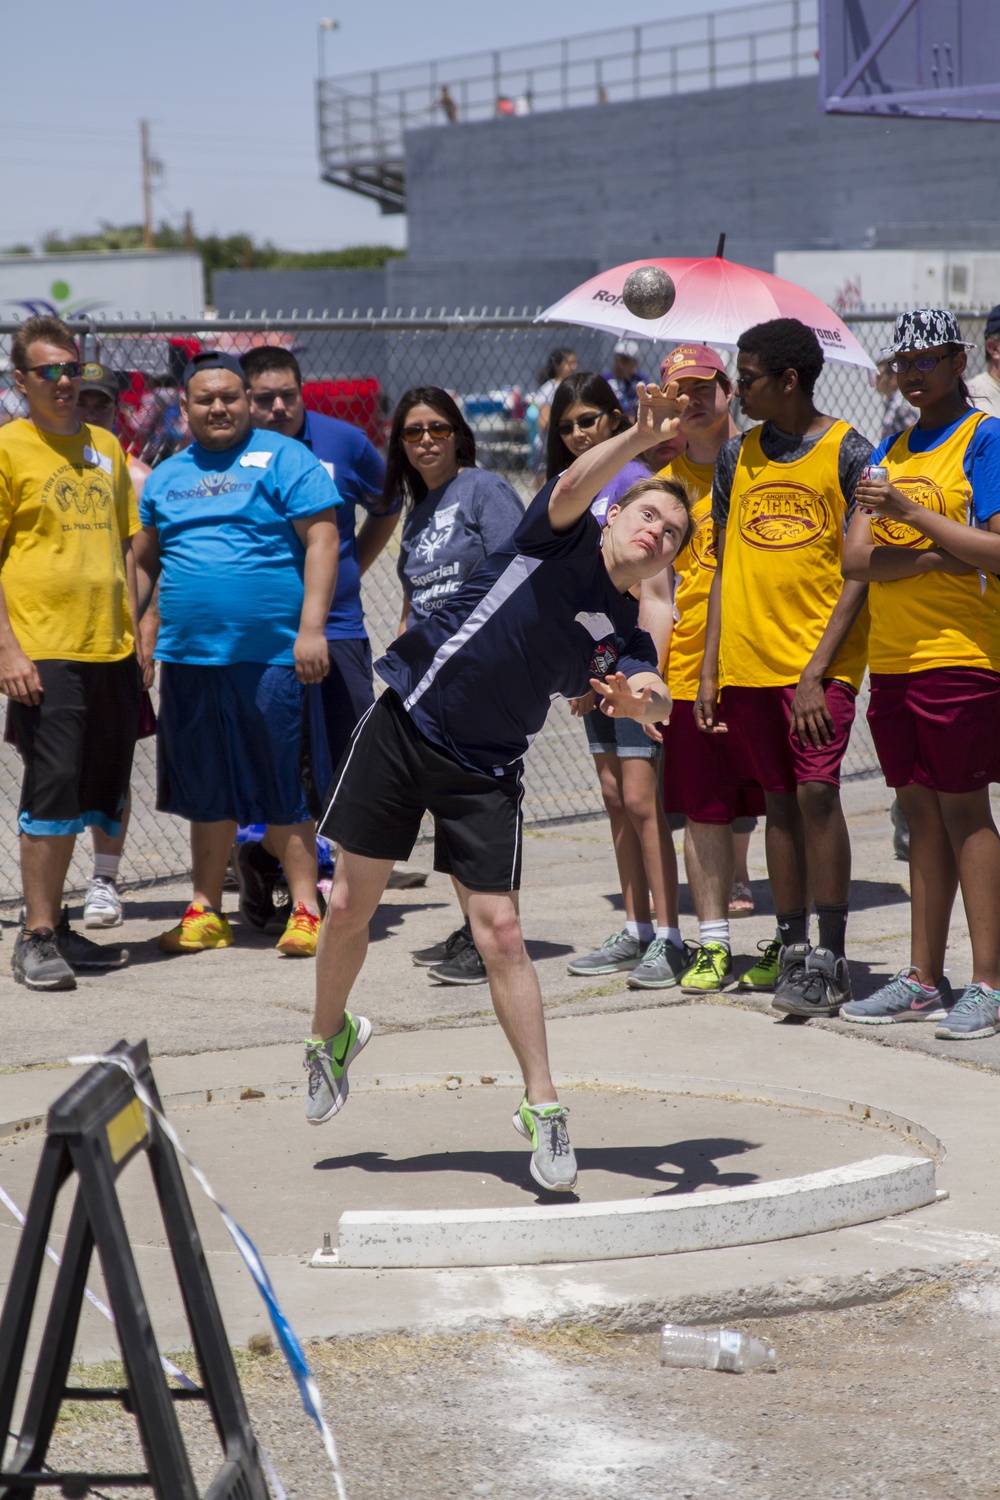 DVIDS Images Special Olympics Spring Games, ‘Team Bliss’ brings